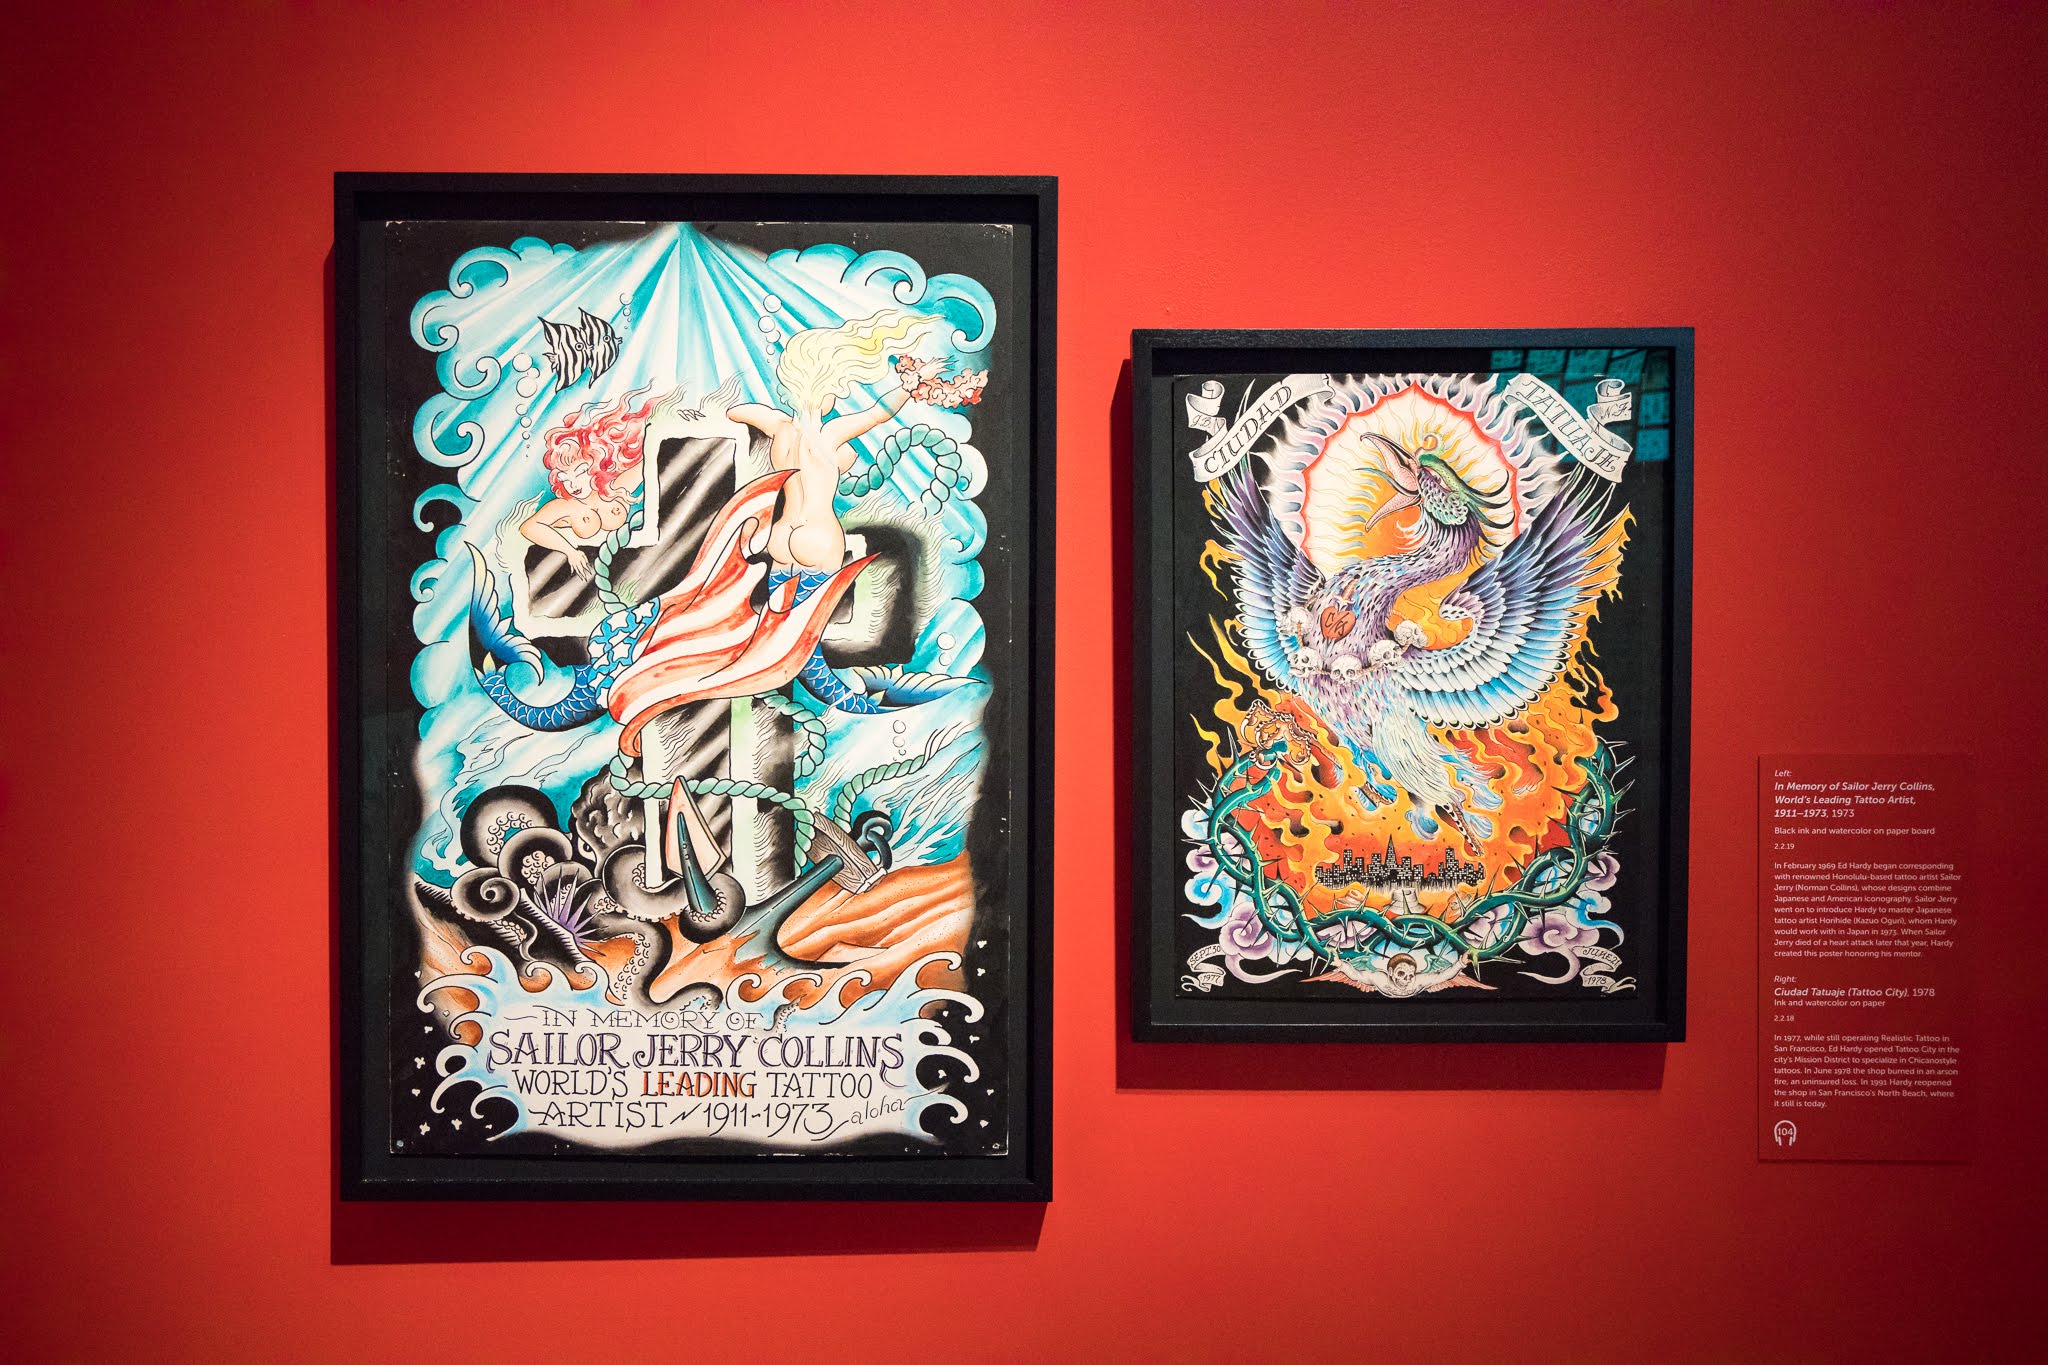 See How Don Ed Hardy Pioneered Modern Tattoo Art At This New De